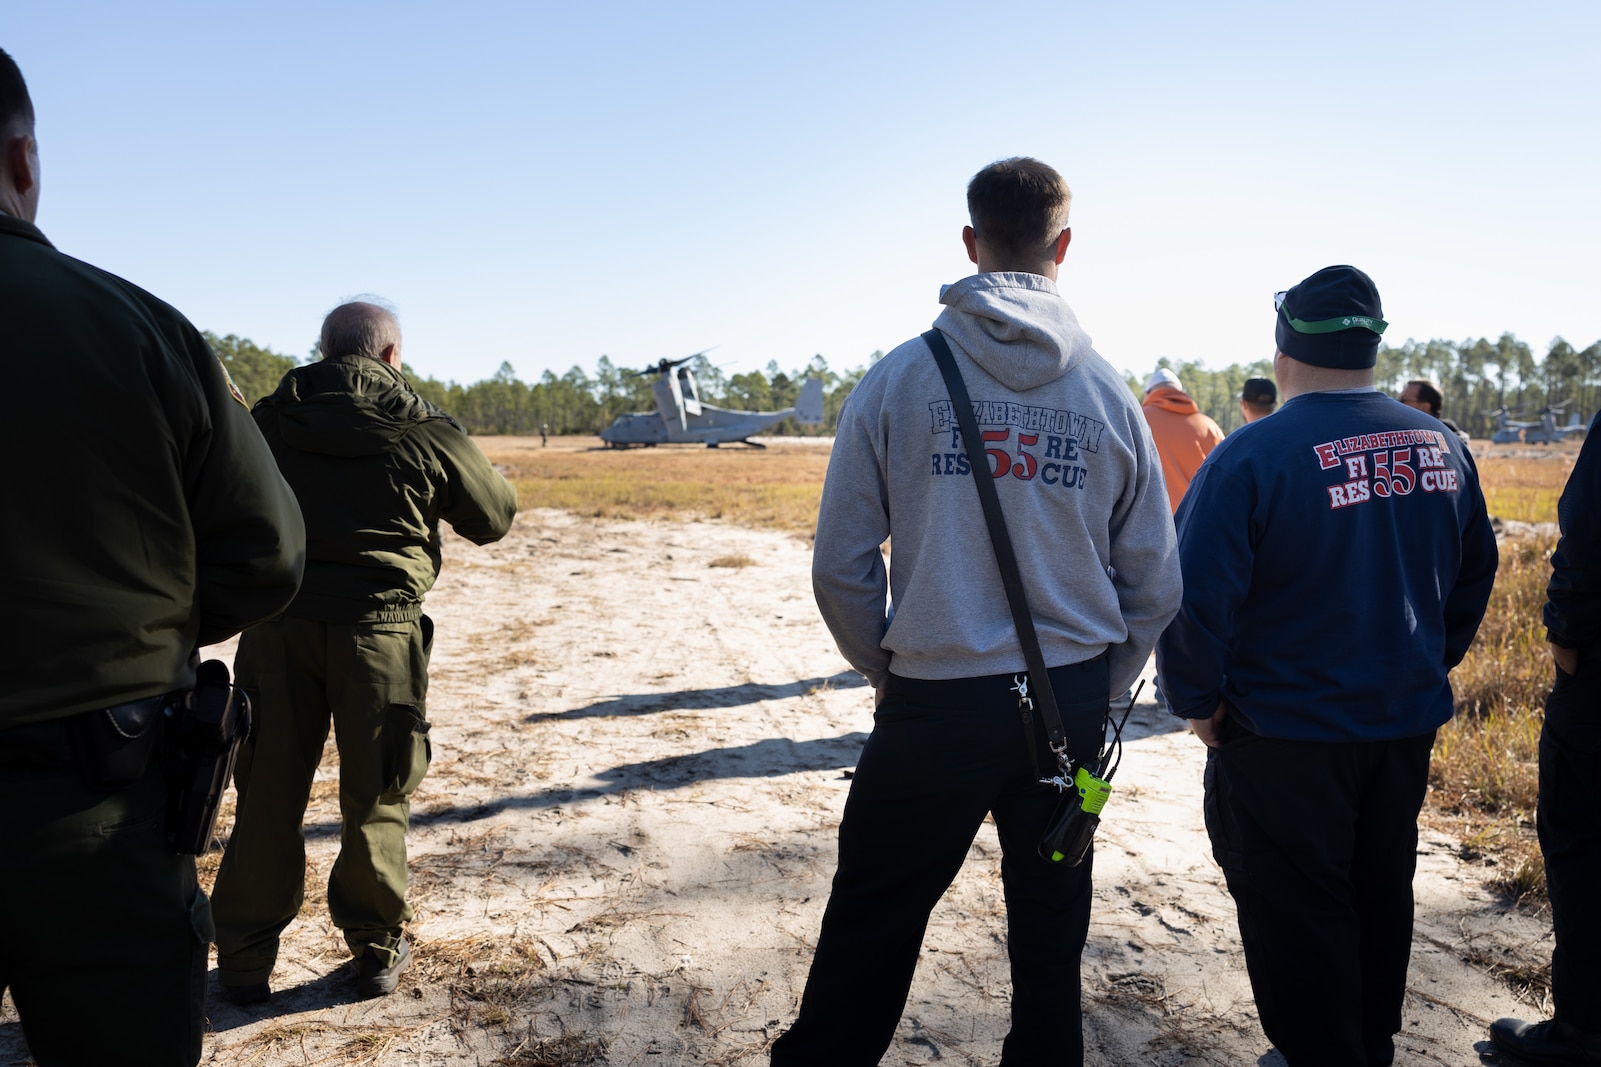 MAG 26 Aviation Mishap Drill Brings Together Local Community